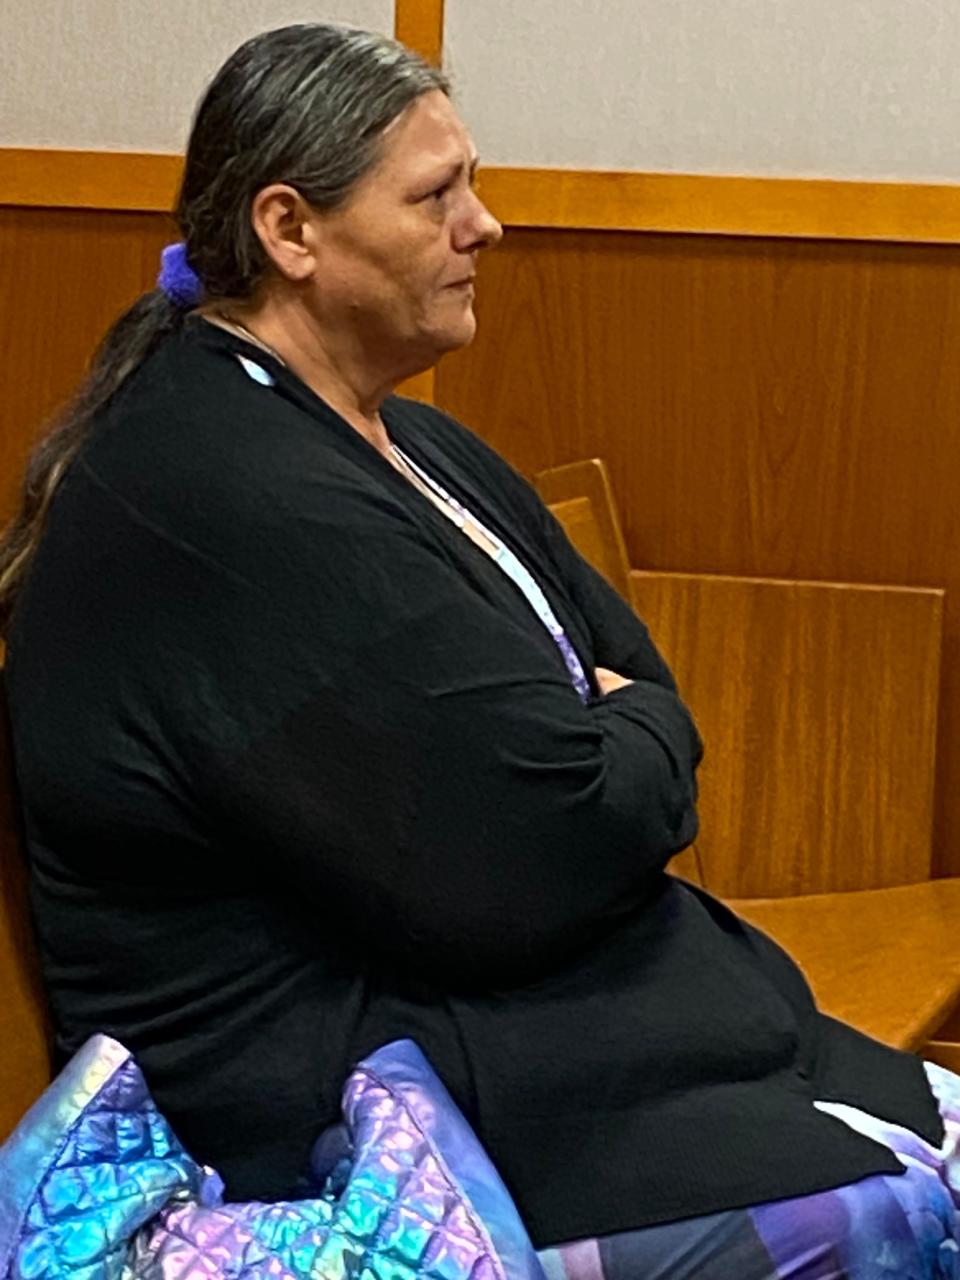 Sara Collins, Joshua McClellan's mother, in court on Friday in Tavares.